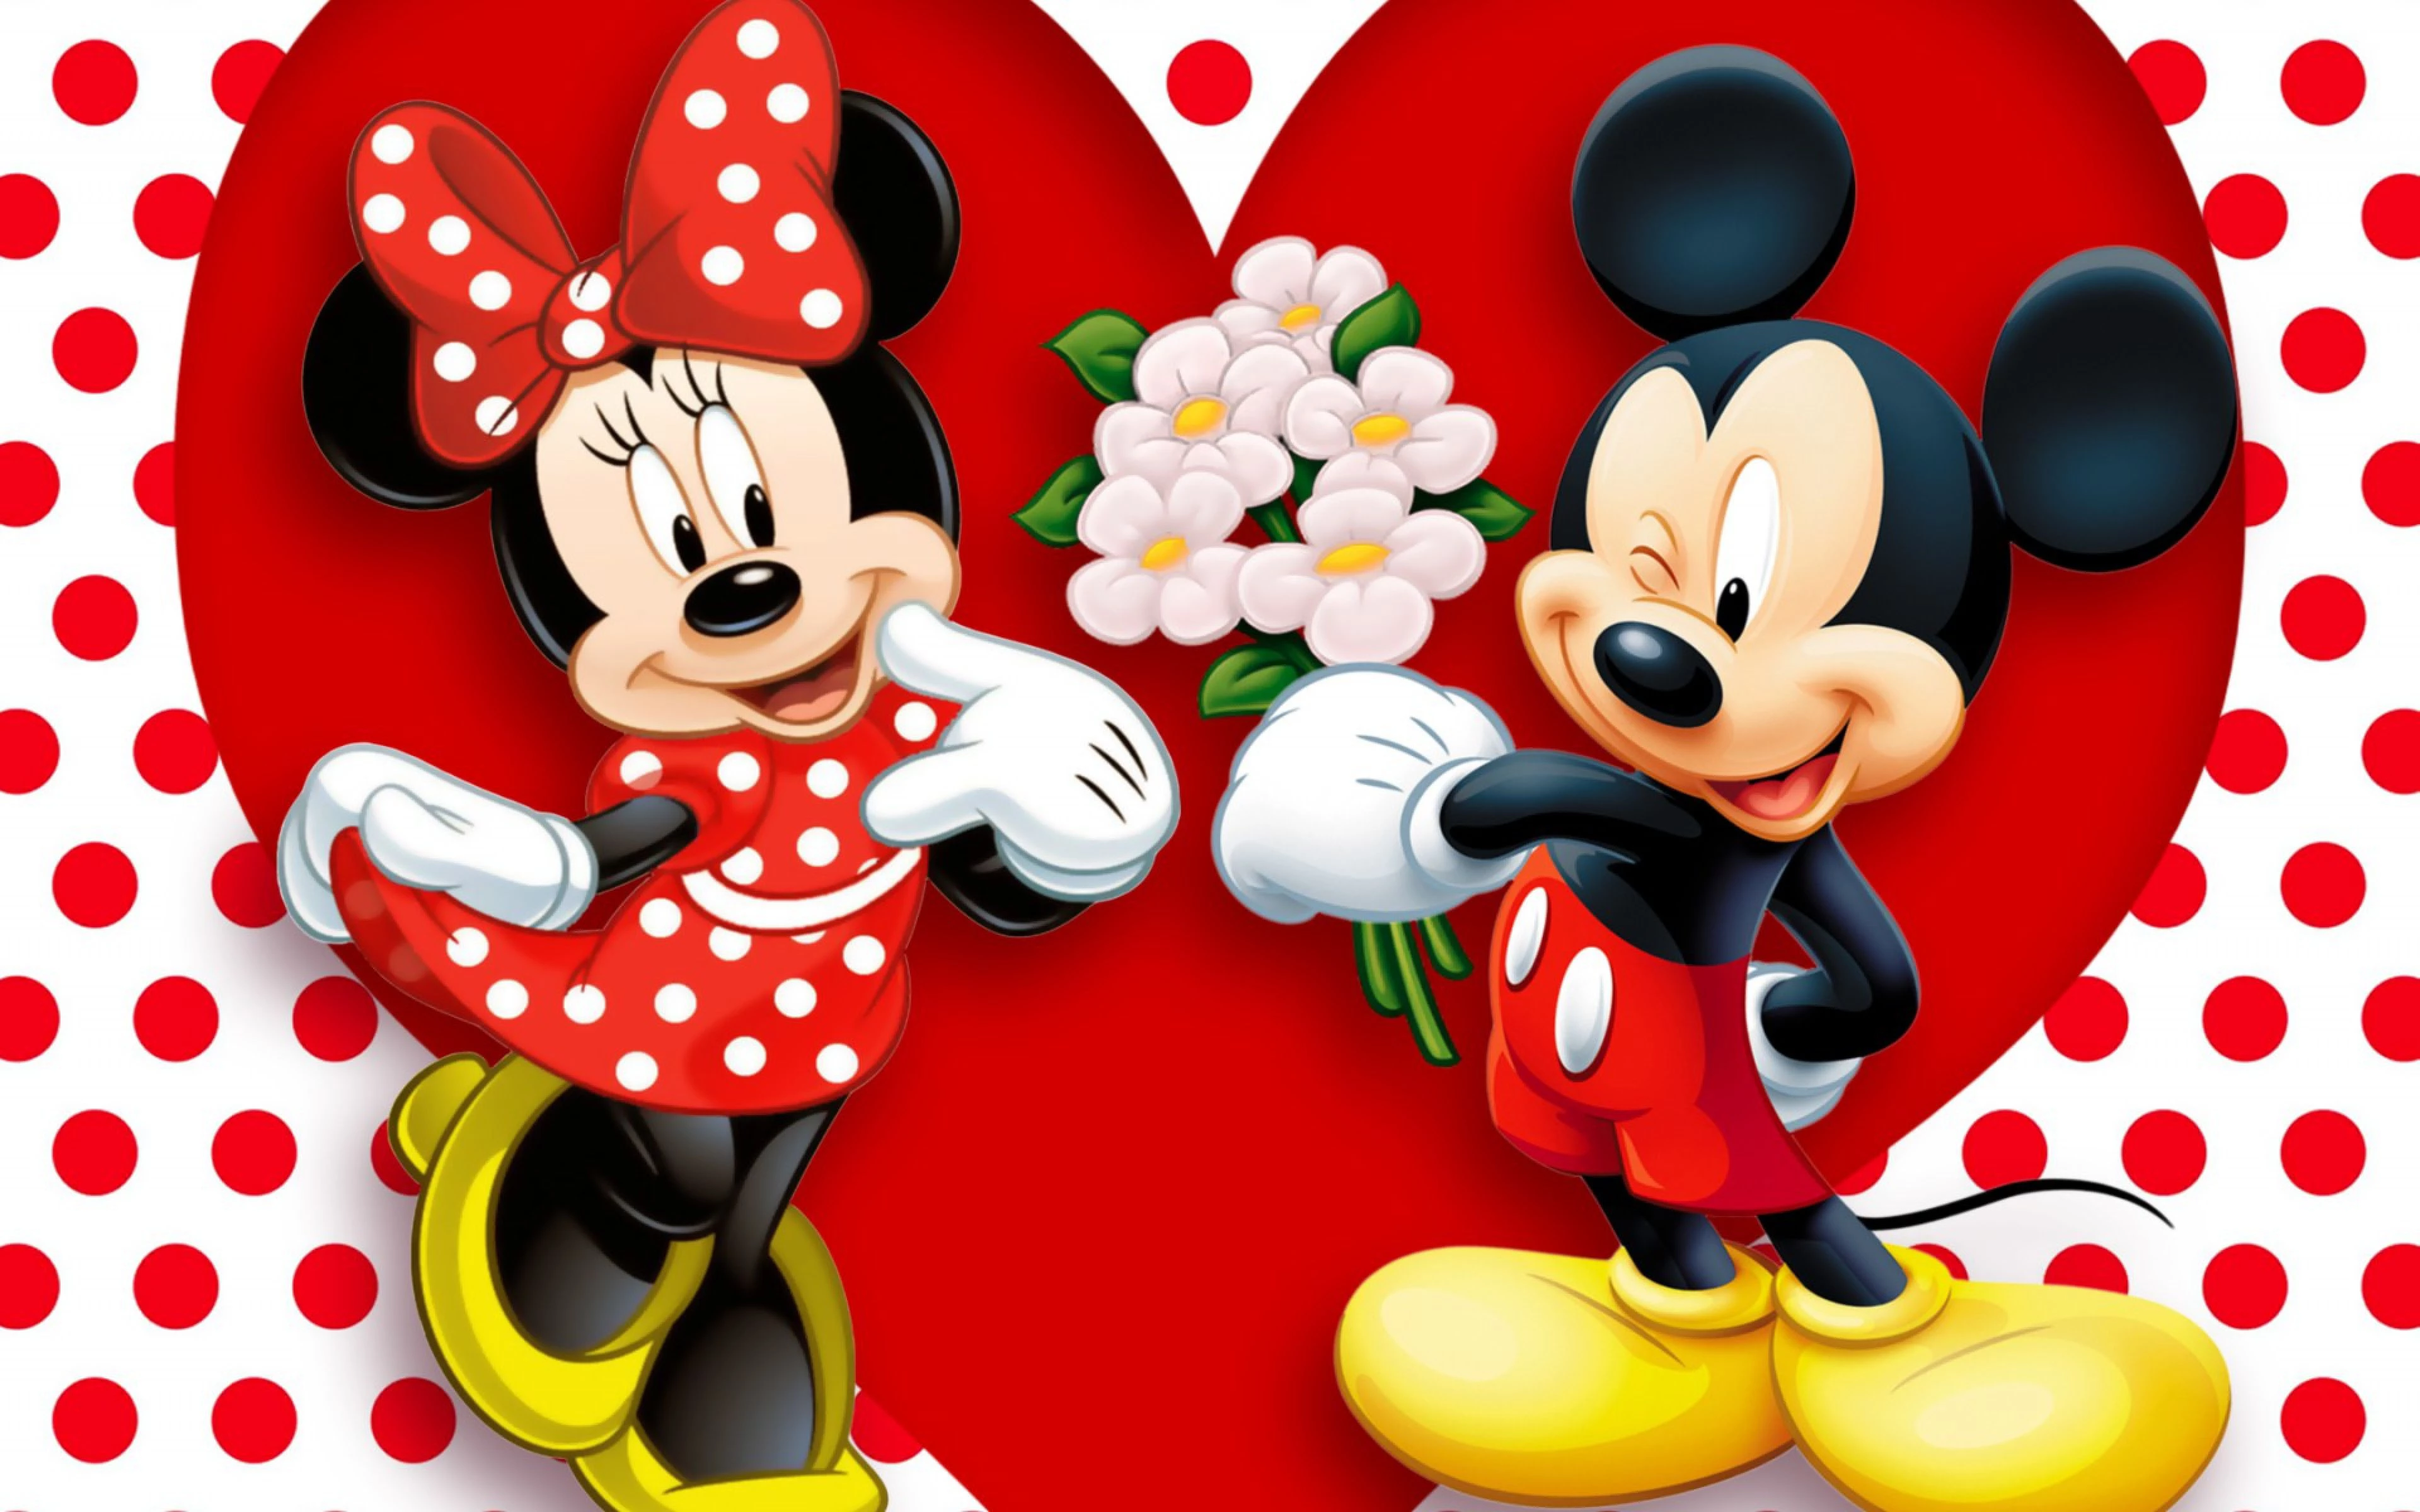 Famous pairs: Mickey And Minnie Mouse